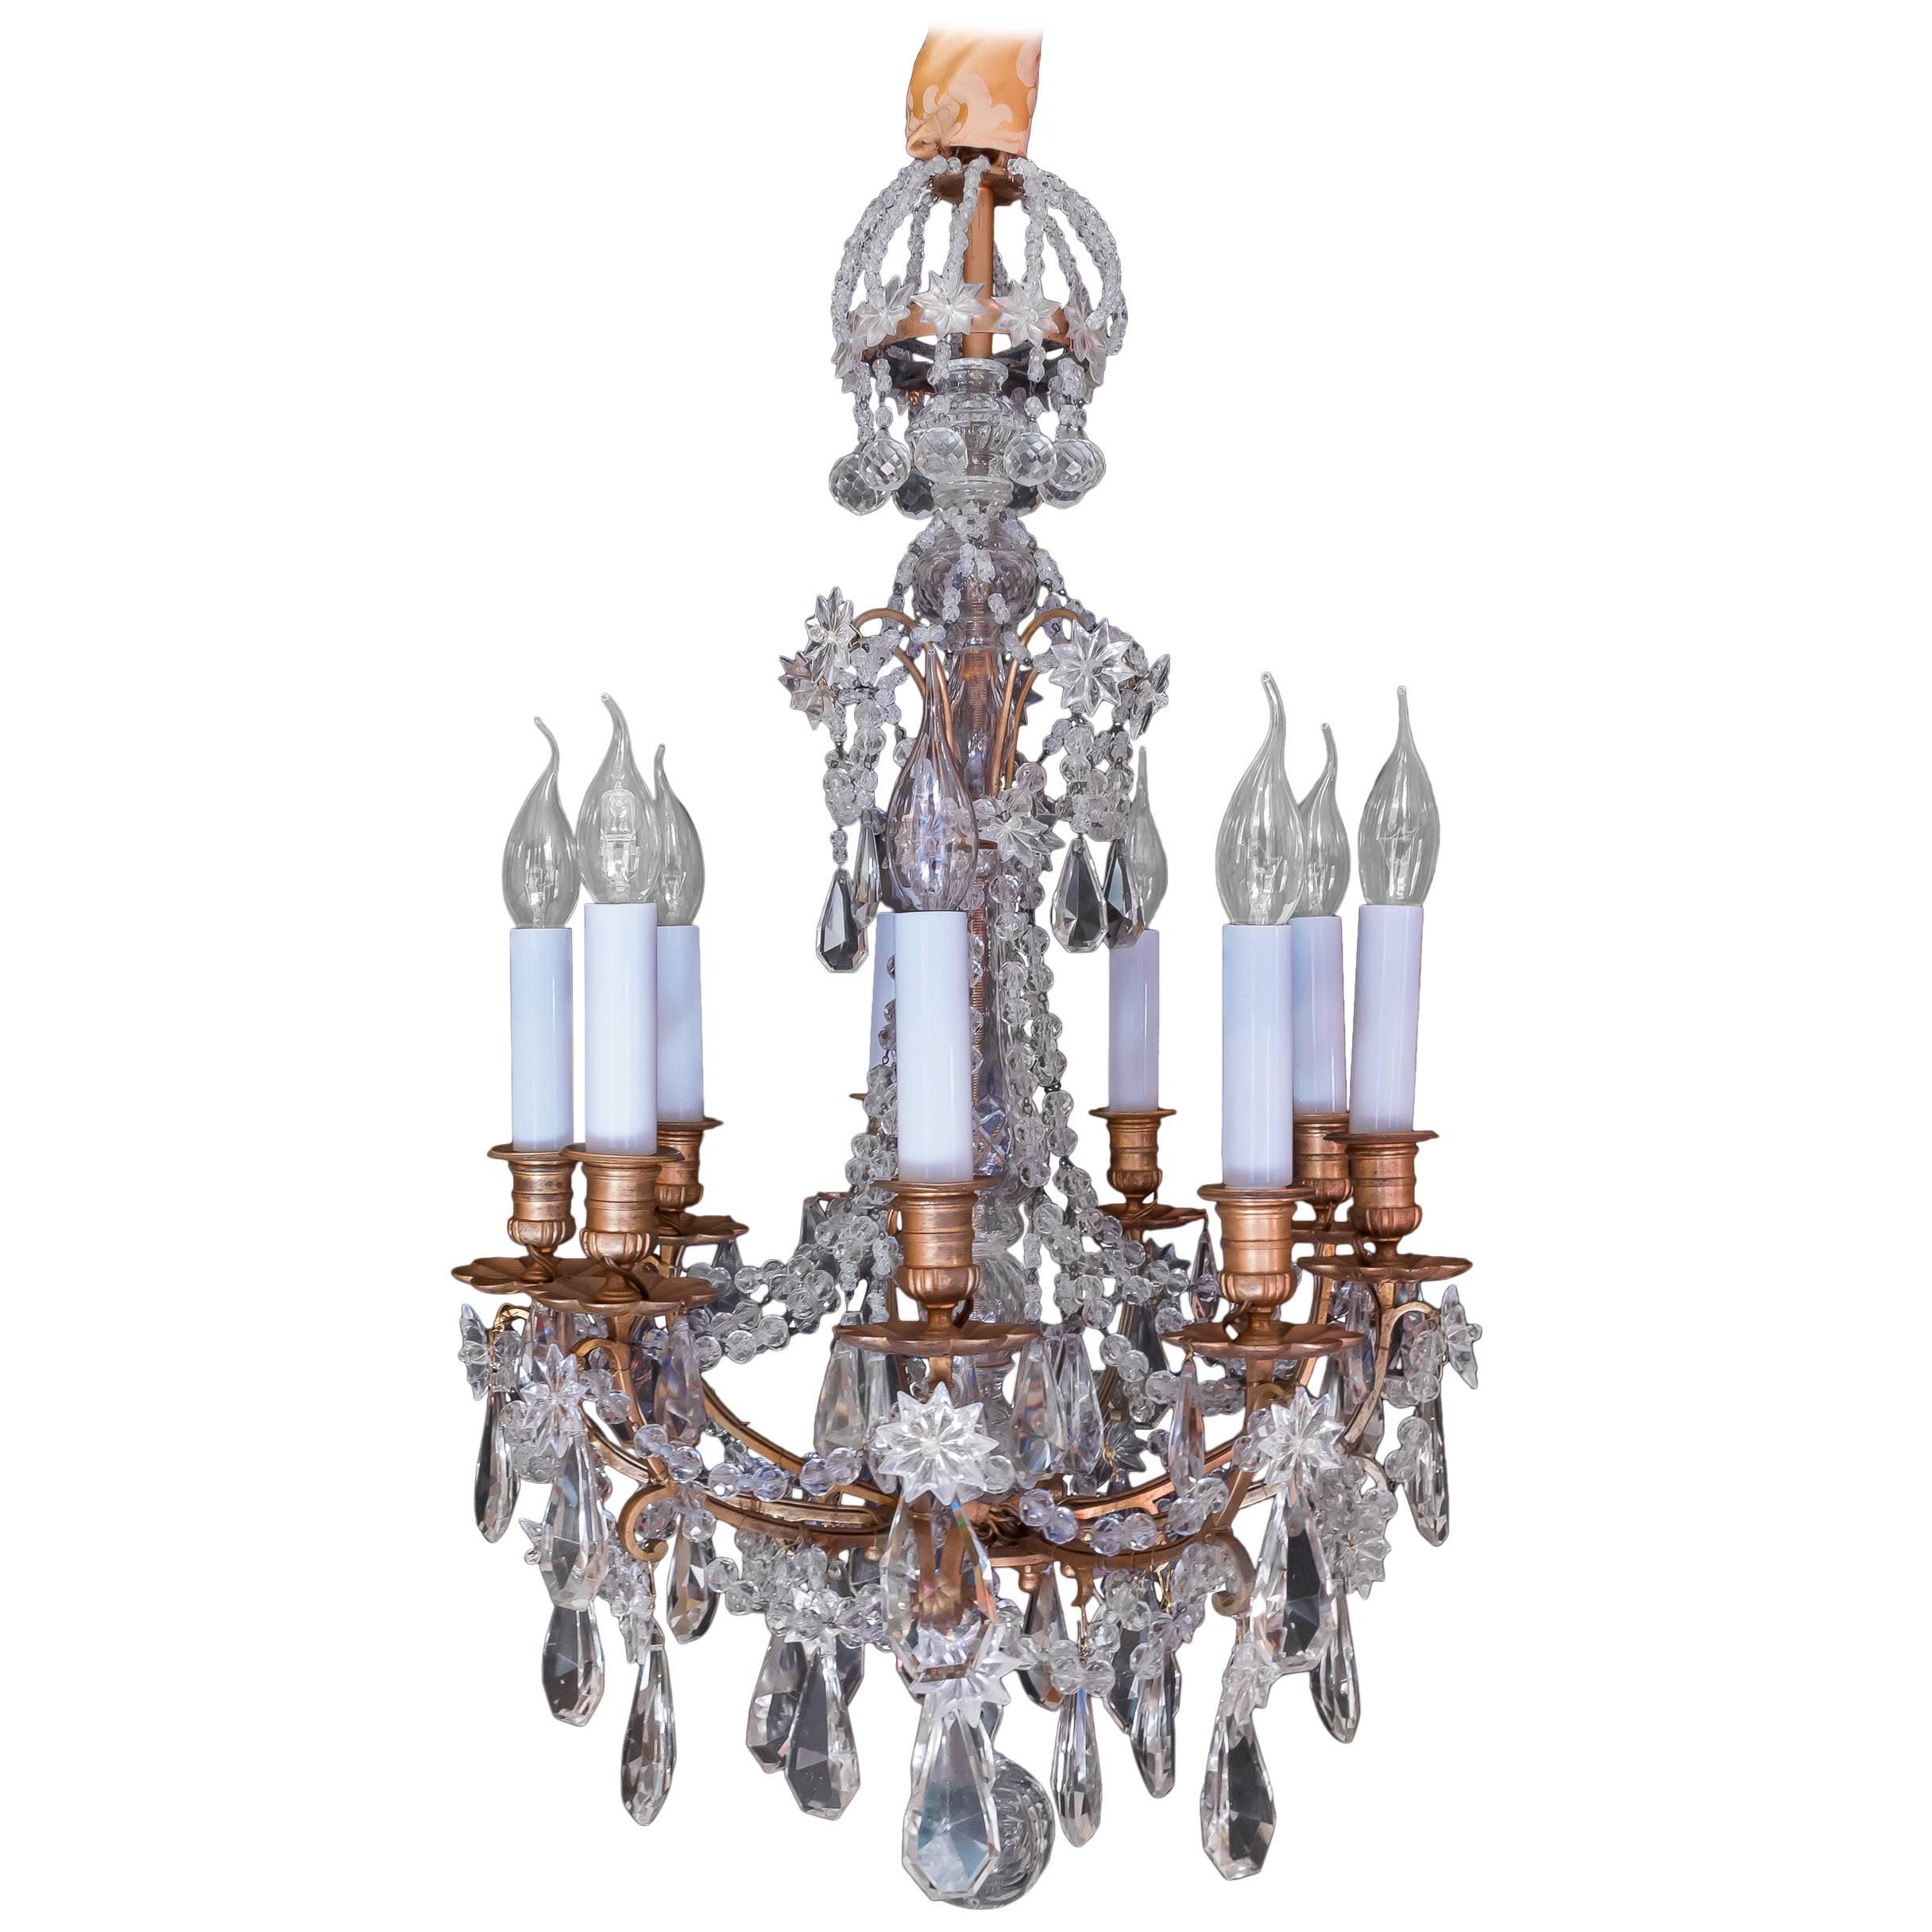 French Small Louis XIV Style Gilt Bronze and Crystal Chandelier, circa 1850